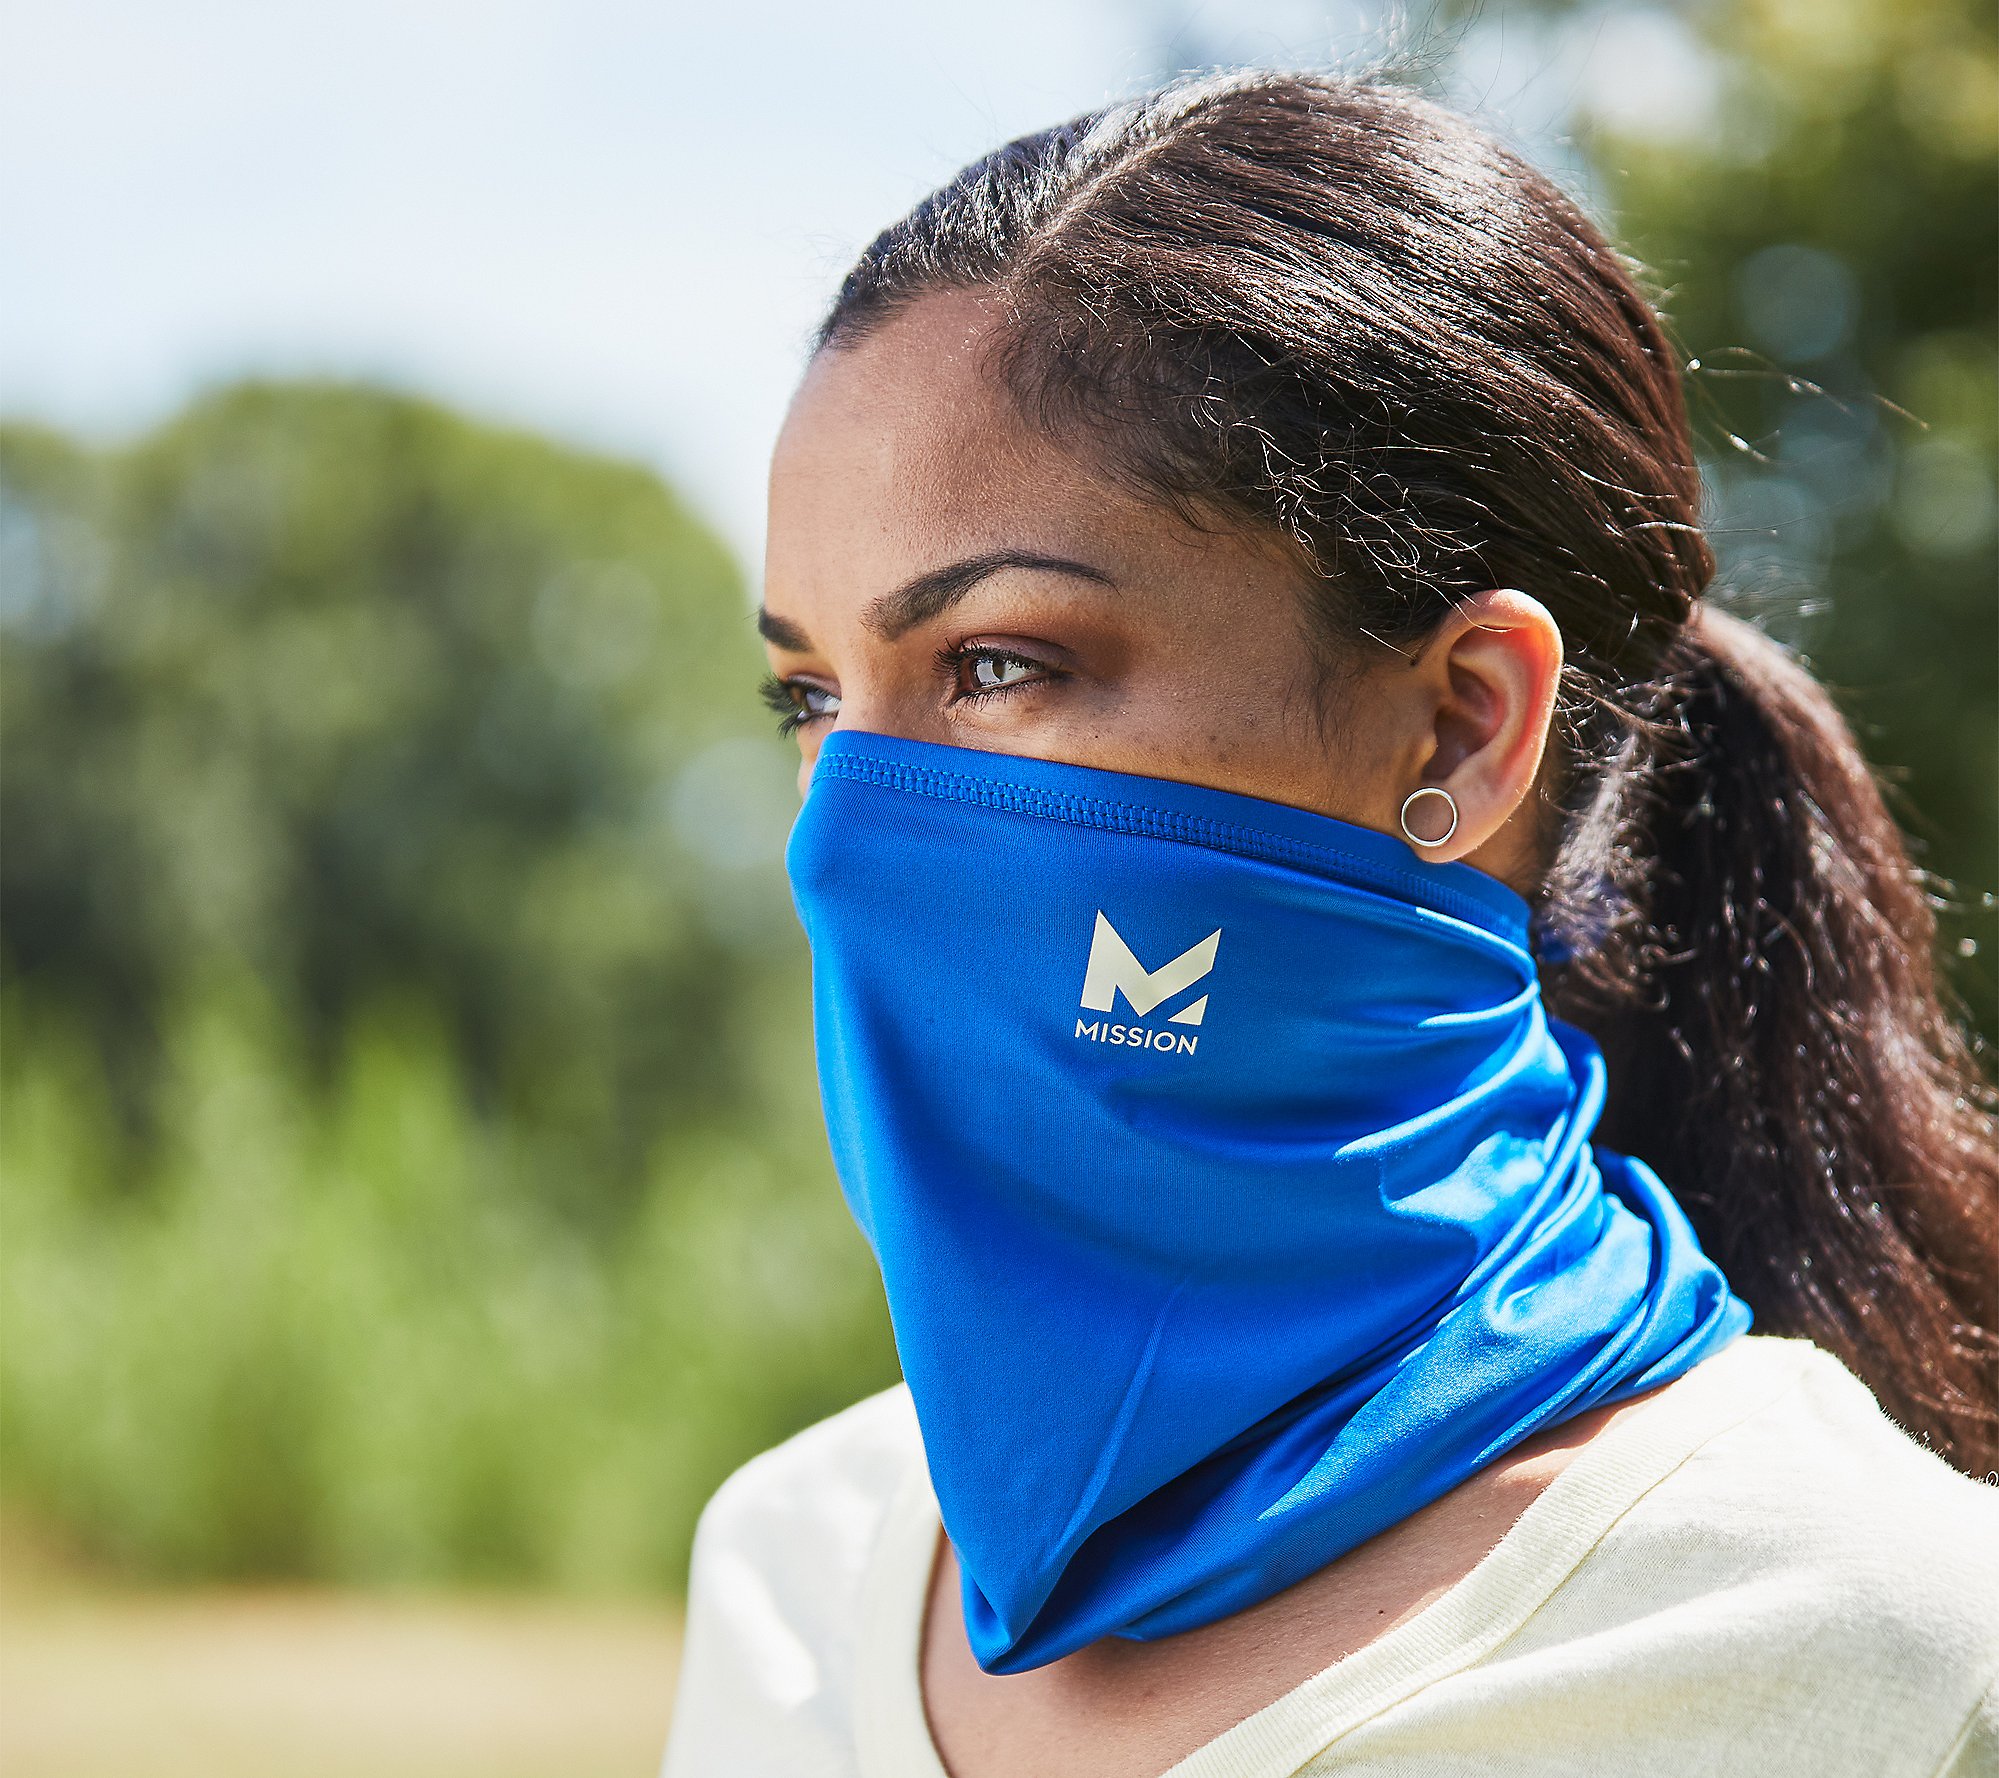 Mission Cooling Neck Gaiter 12+ Ways To Wears Cools when Wet Face Mask UPF 50 